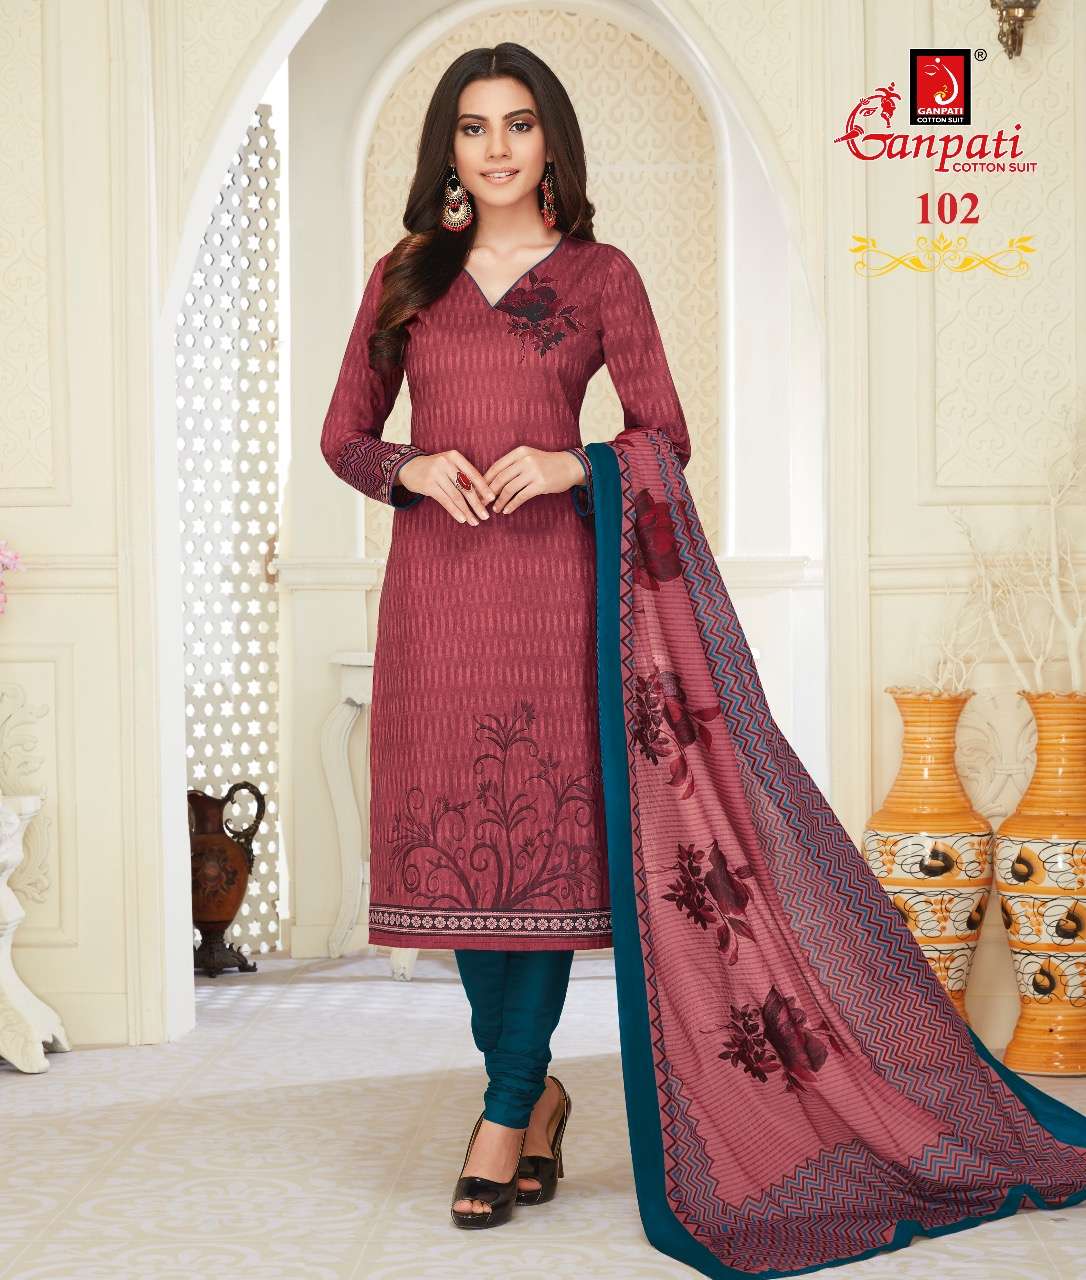 Jeeya Vol-6 By Ganpati Cotton Suits 601 To 615 Series Beautiful Suits Colorful Stylish Fancy Casual Wear & Ethnic Wear Cotton Dresses At Wholesale Price